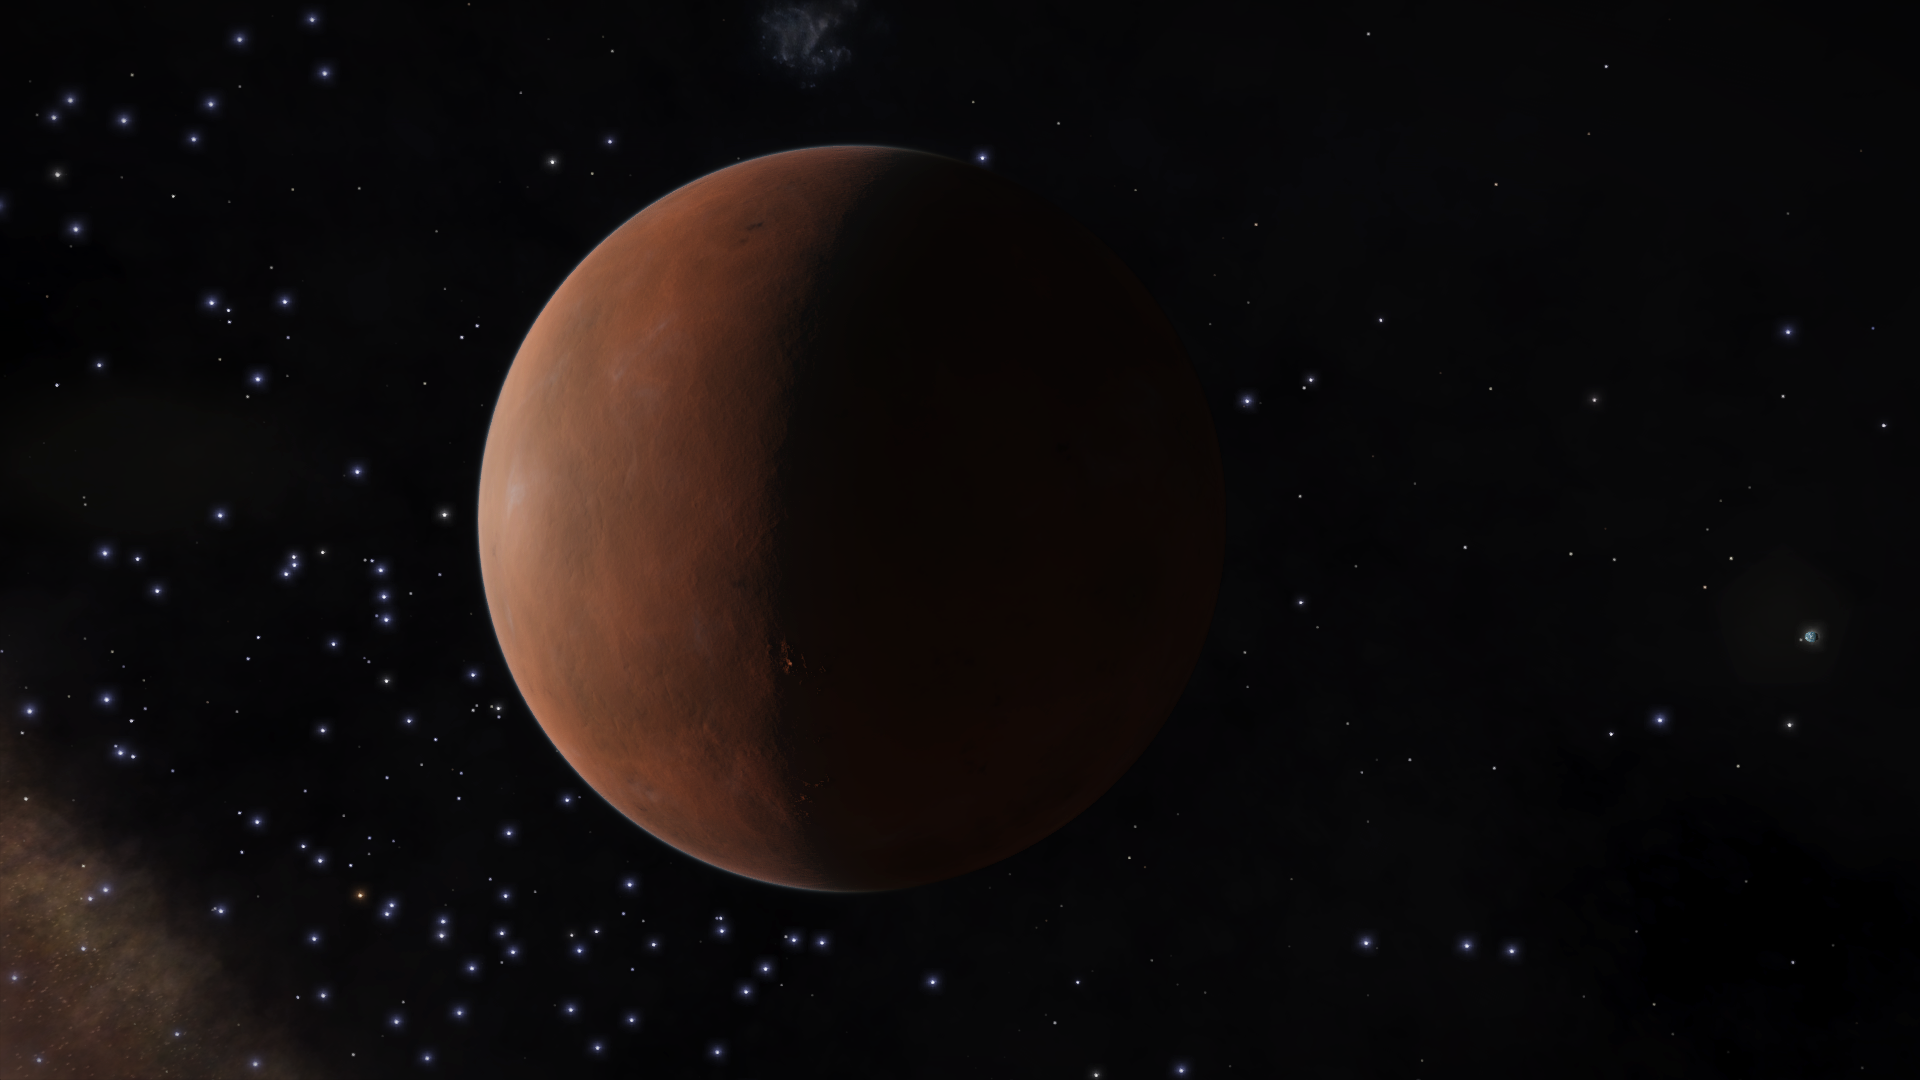 A HMC in the same system